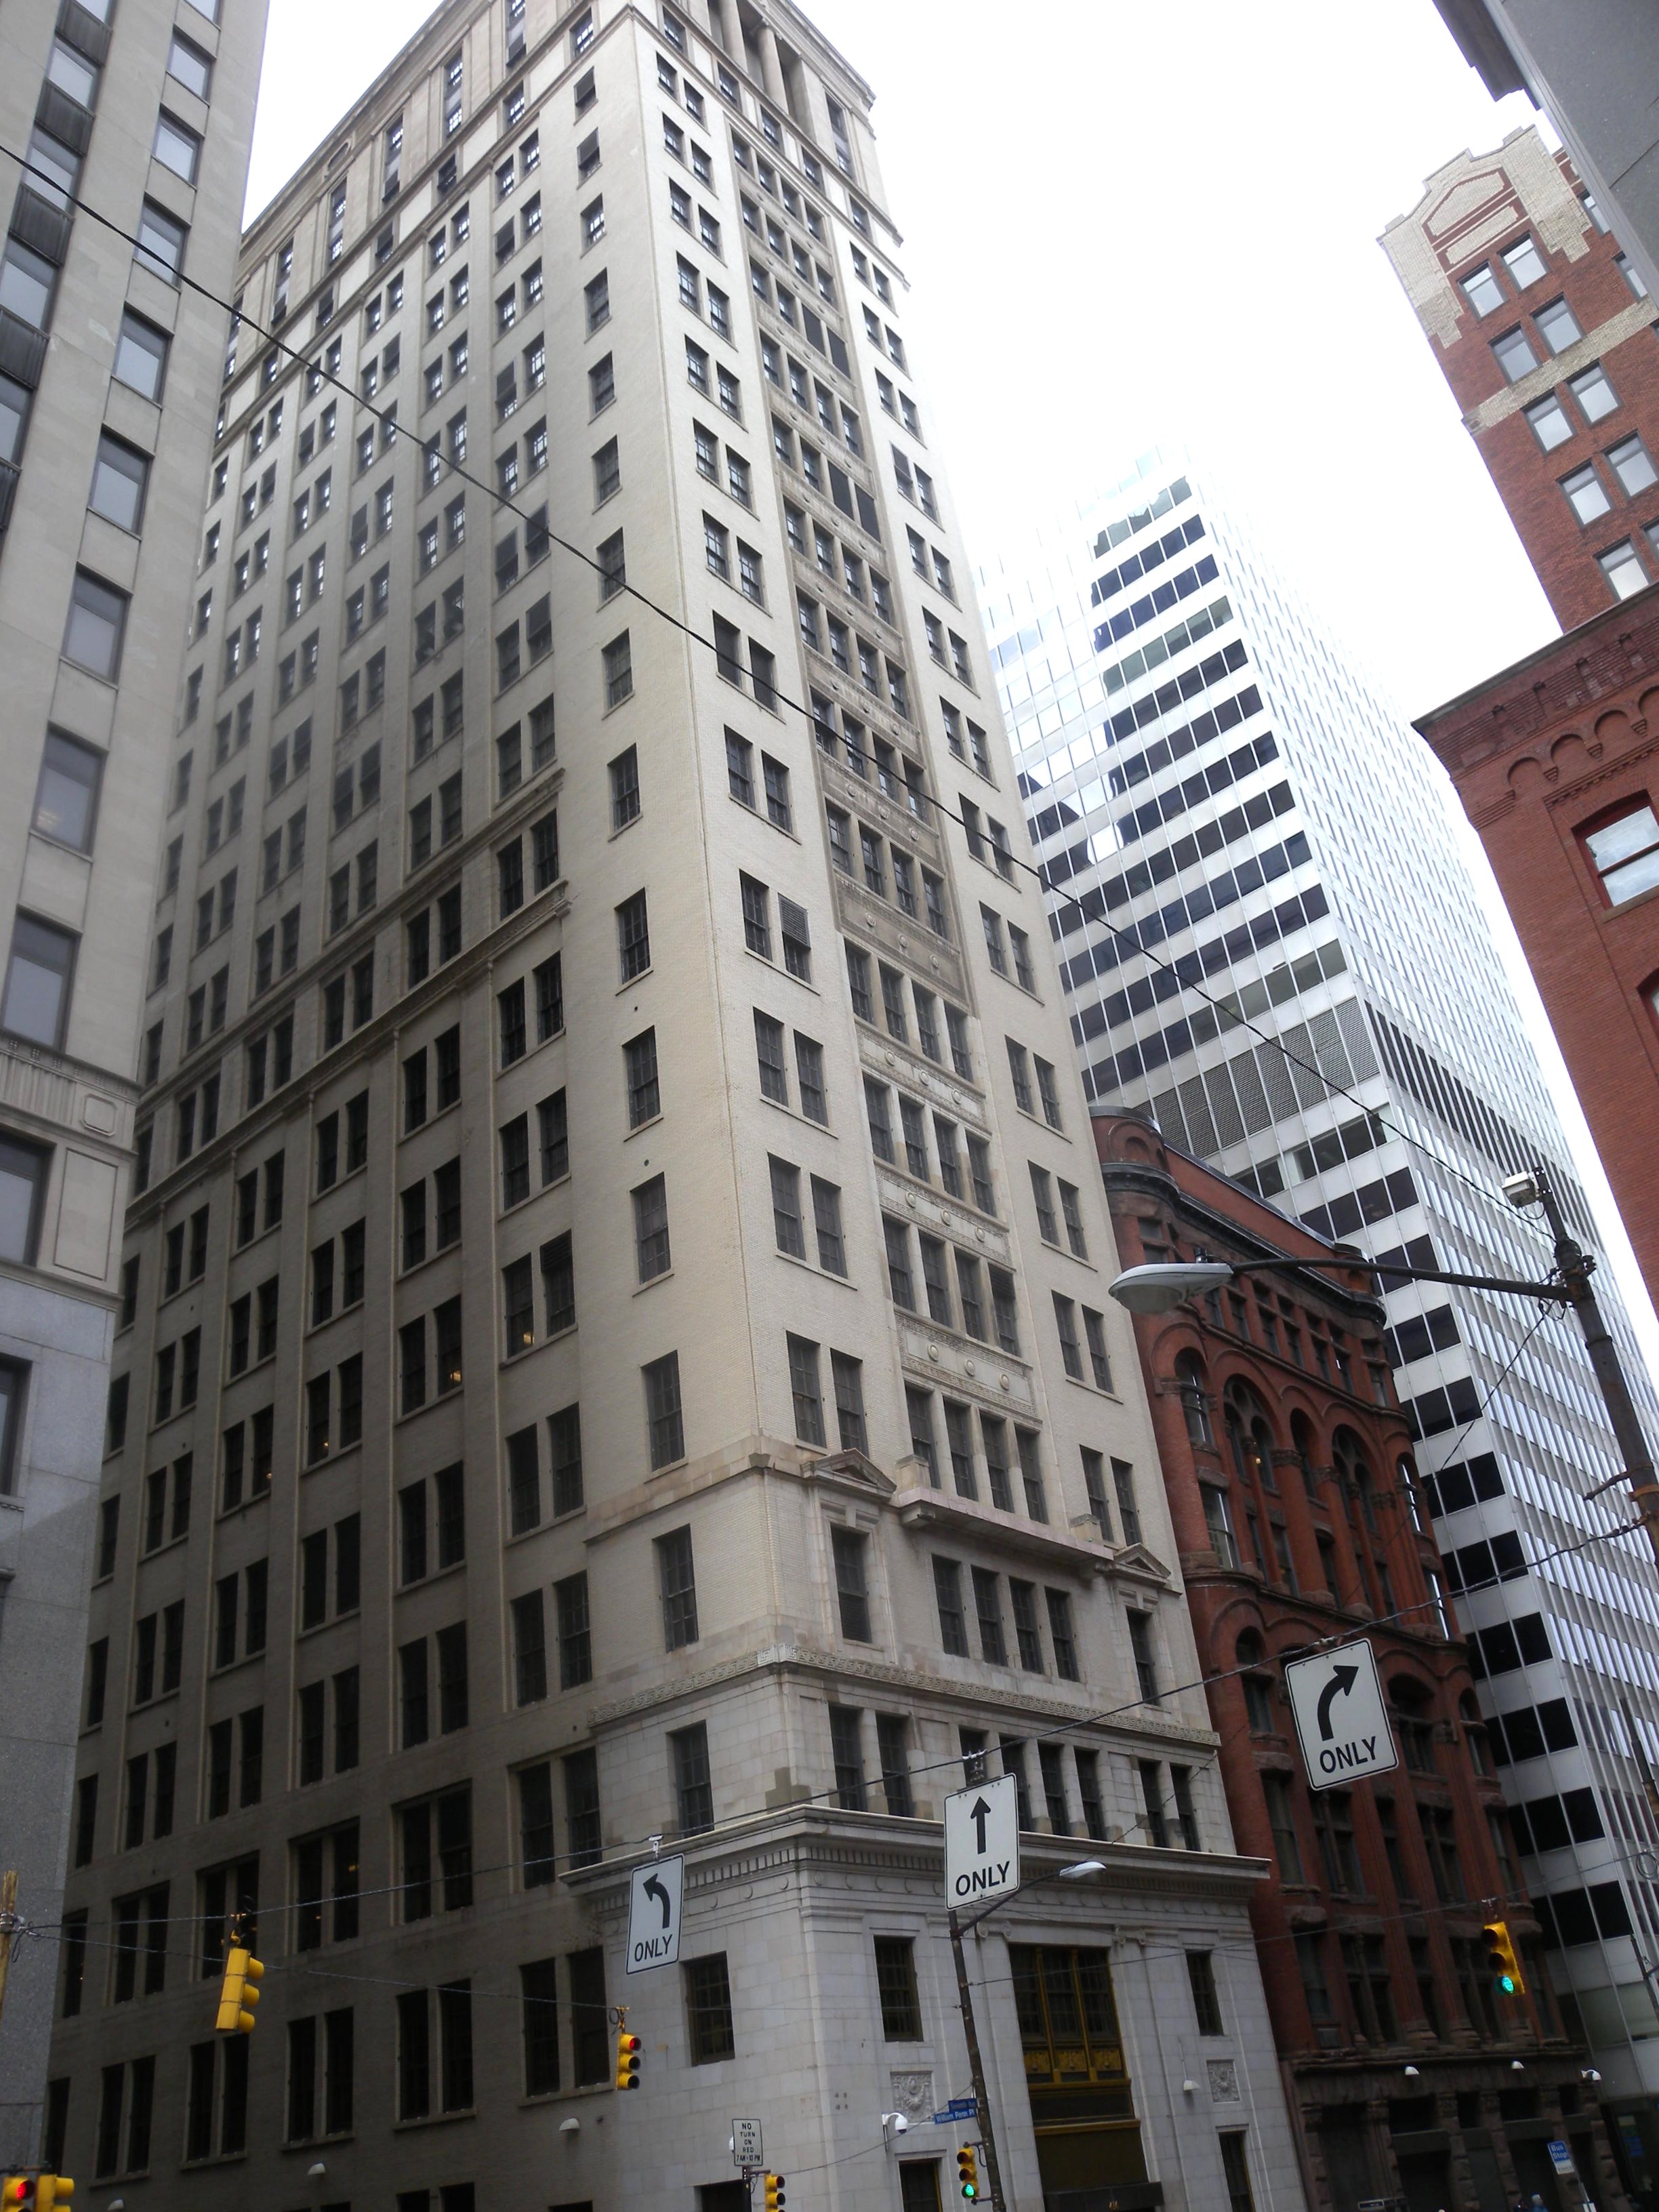 Bell Telephone Building, Pittsburgh